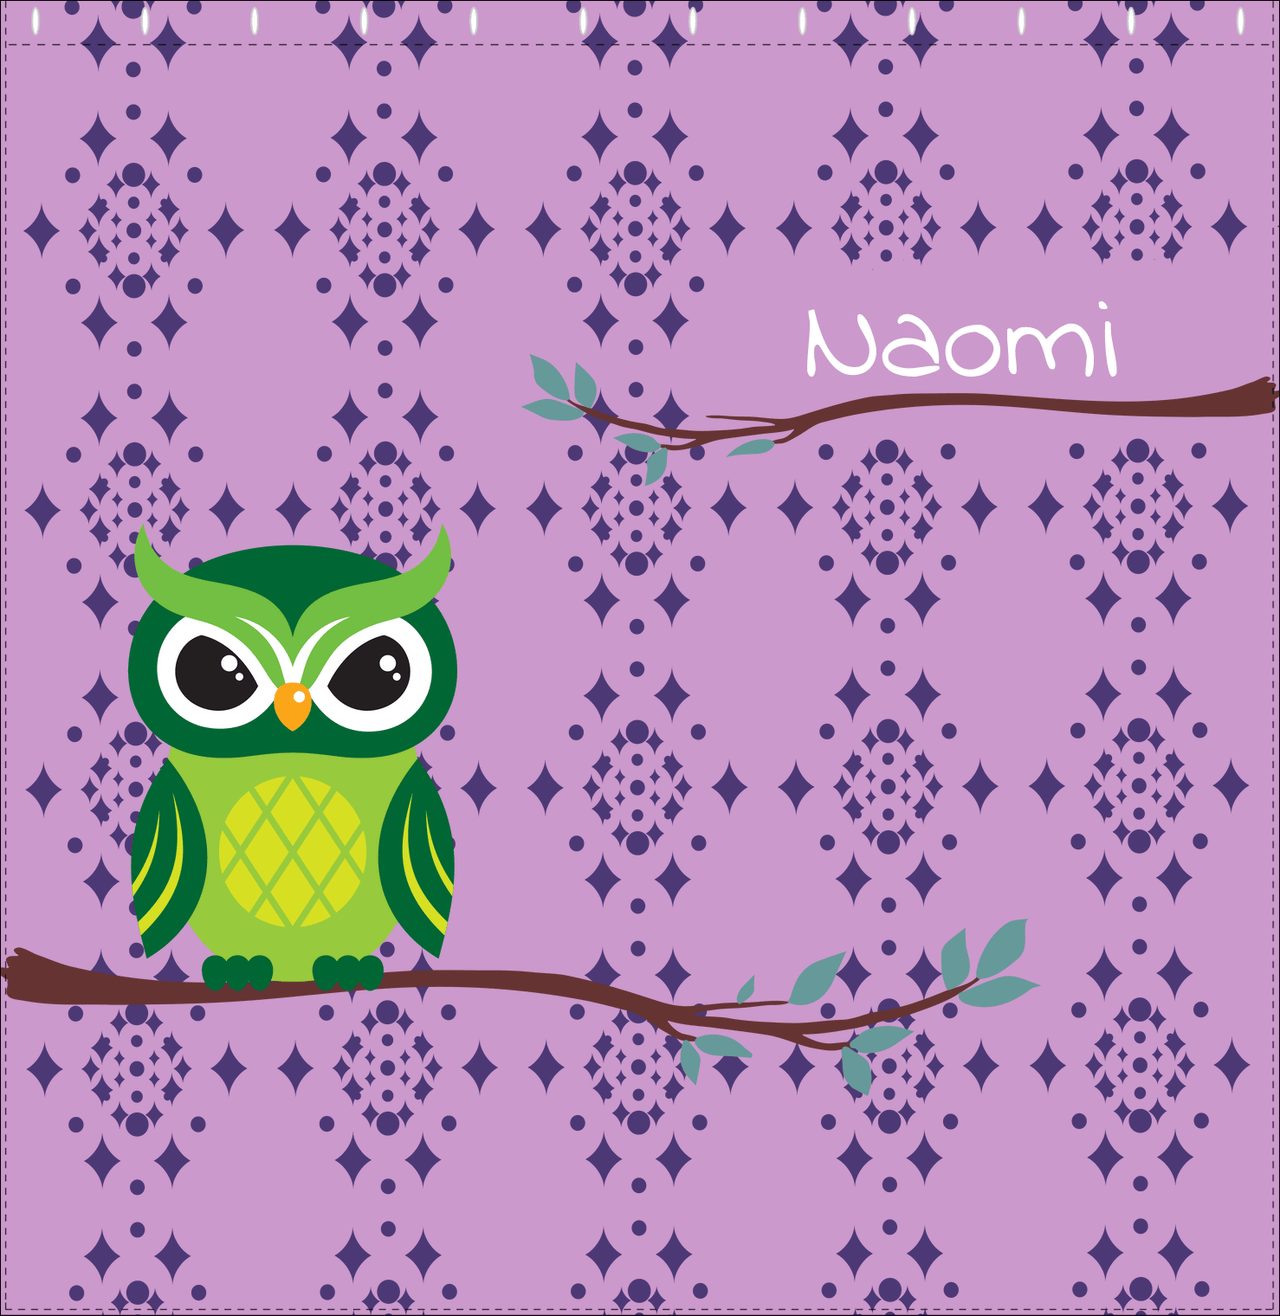 Personalized Owl Shower Curtain I - Owl 03 - Pink Background - Decorate View